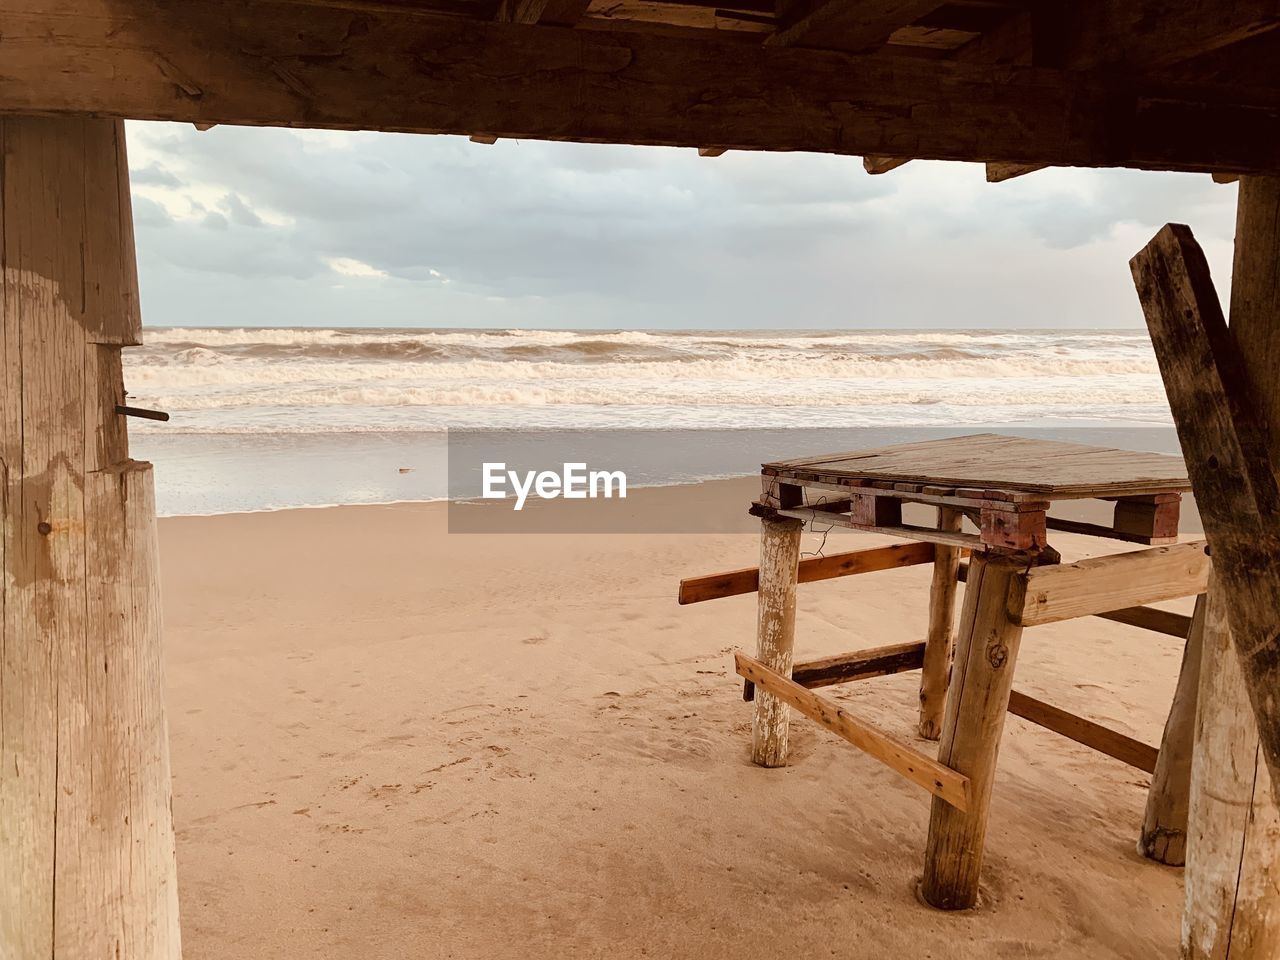 SCENIC VIEW OF SEA AGAINST SKY SEEN THROUGH WOODEN POSTS